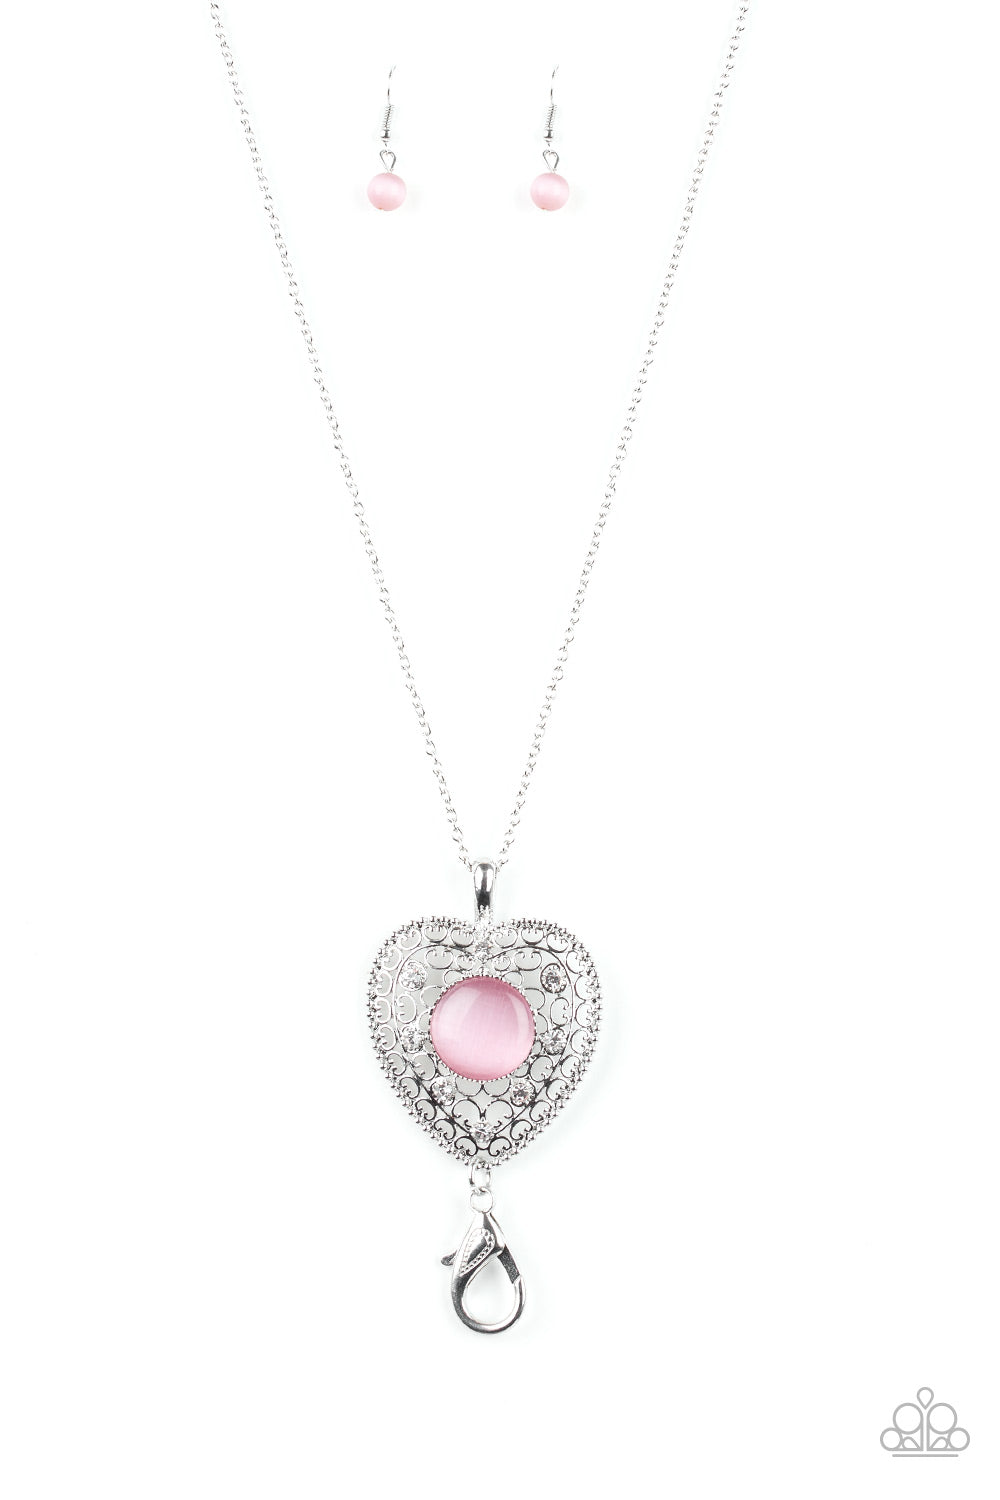 One Heart Pink Paparazzi Necklaces Cashmere Pink Jewels - Cashmere Pink Jewels & Accessories, Cashmere Pink Jewels & Accessories - Paparazzi